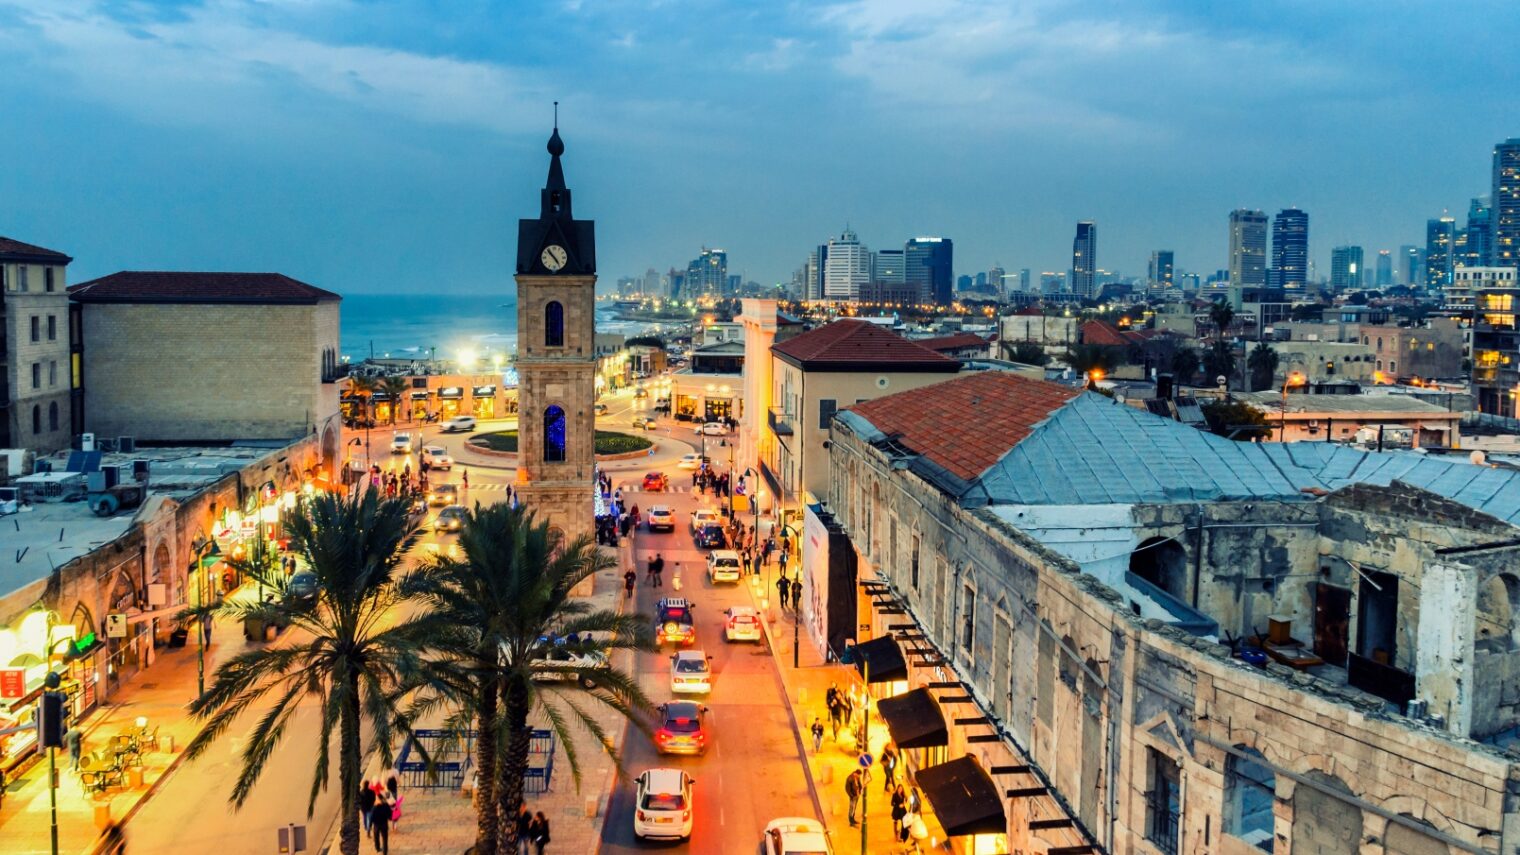 The Jaffa clock tower dominates Clock Square, a landmark at the entrance to the Jaffa section of Tel Aviv. Photo by JekLi/Shutterstock.com